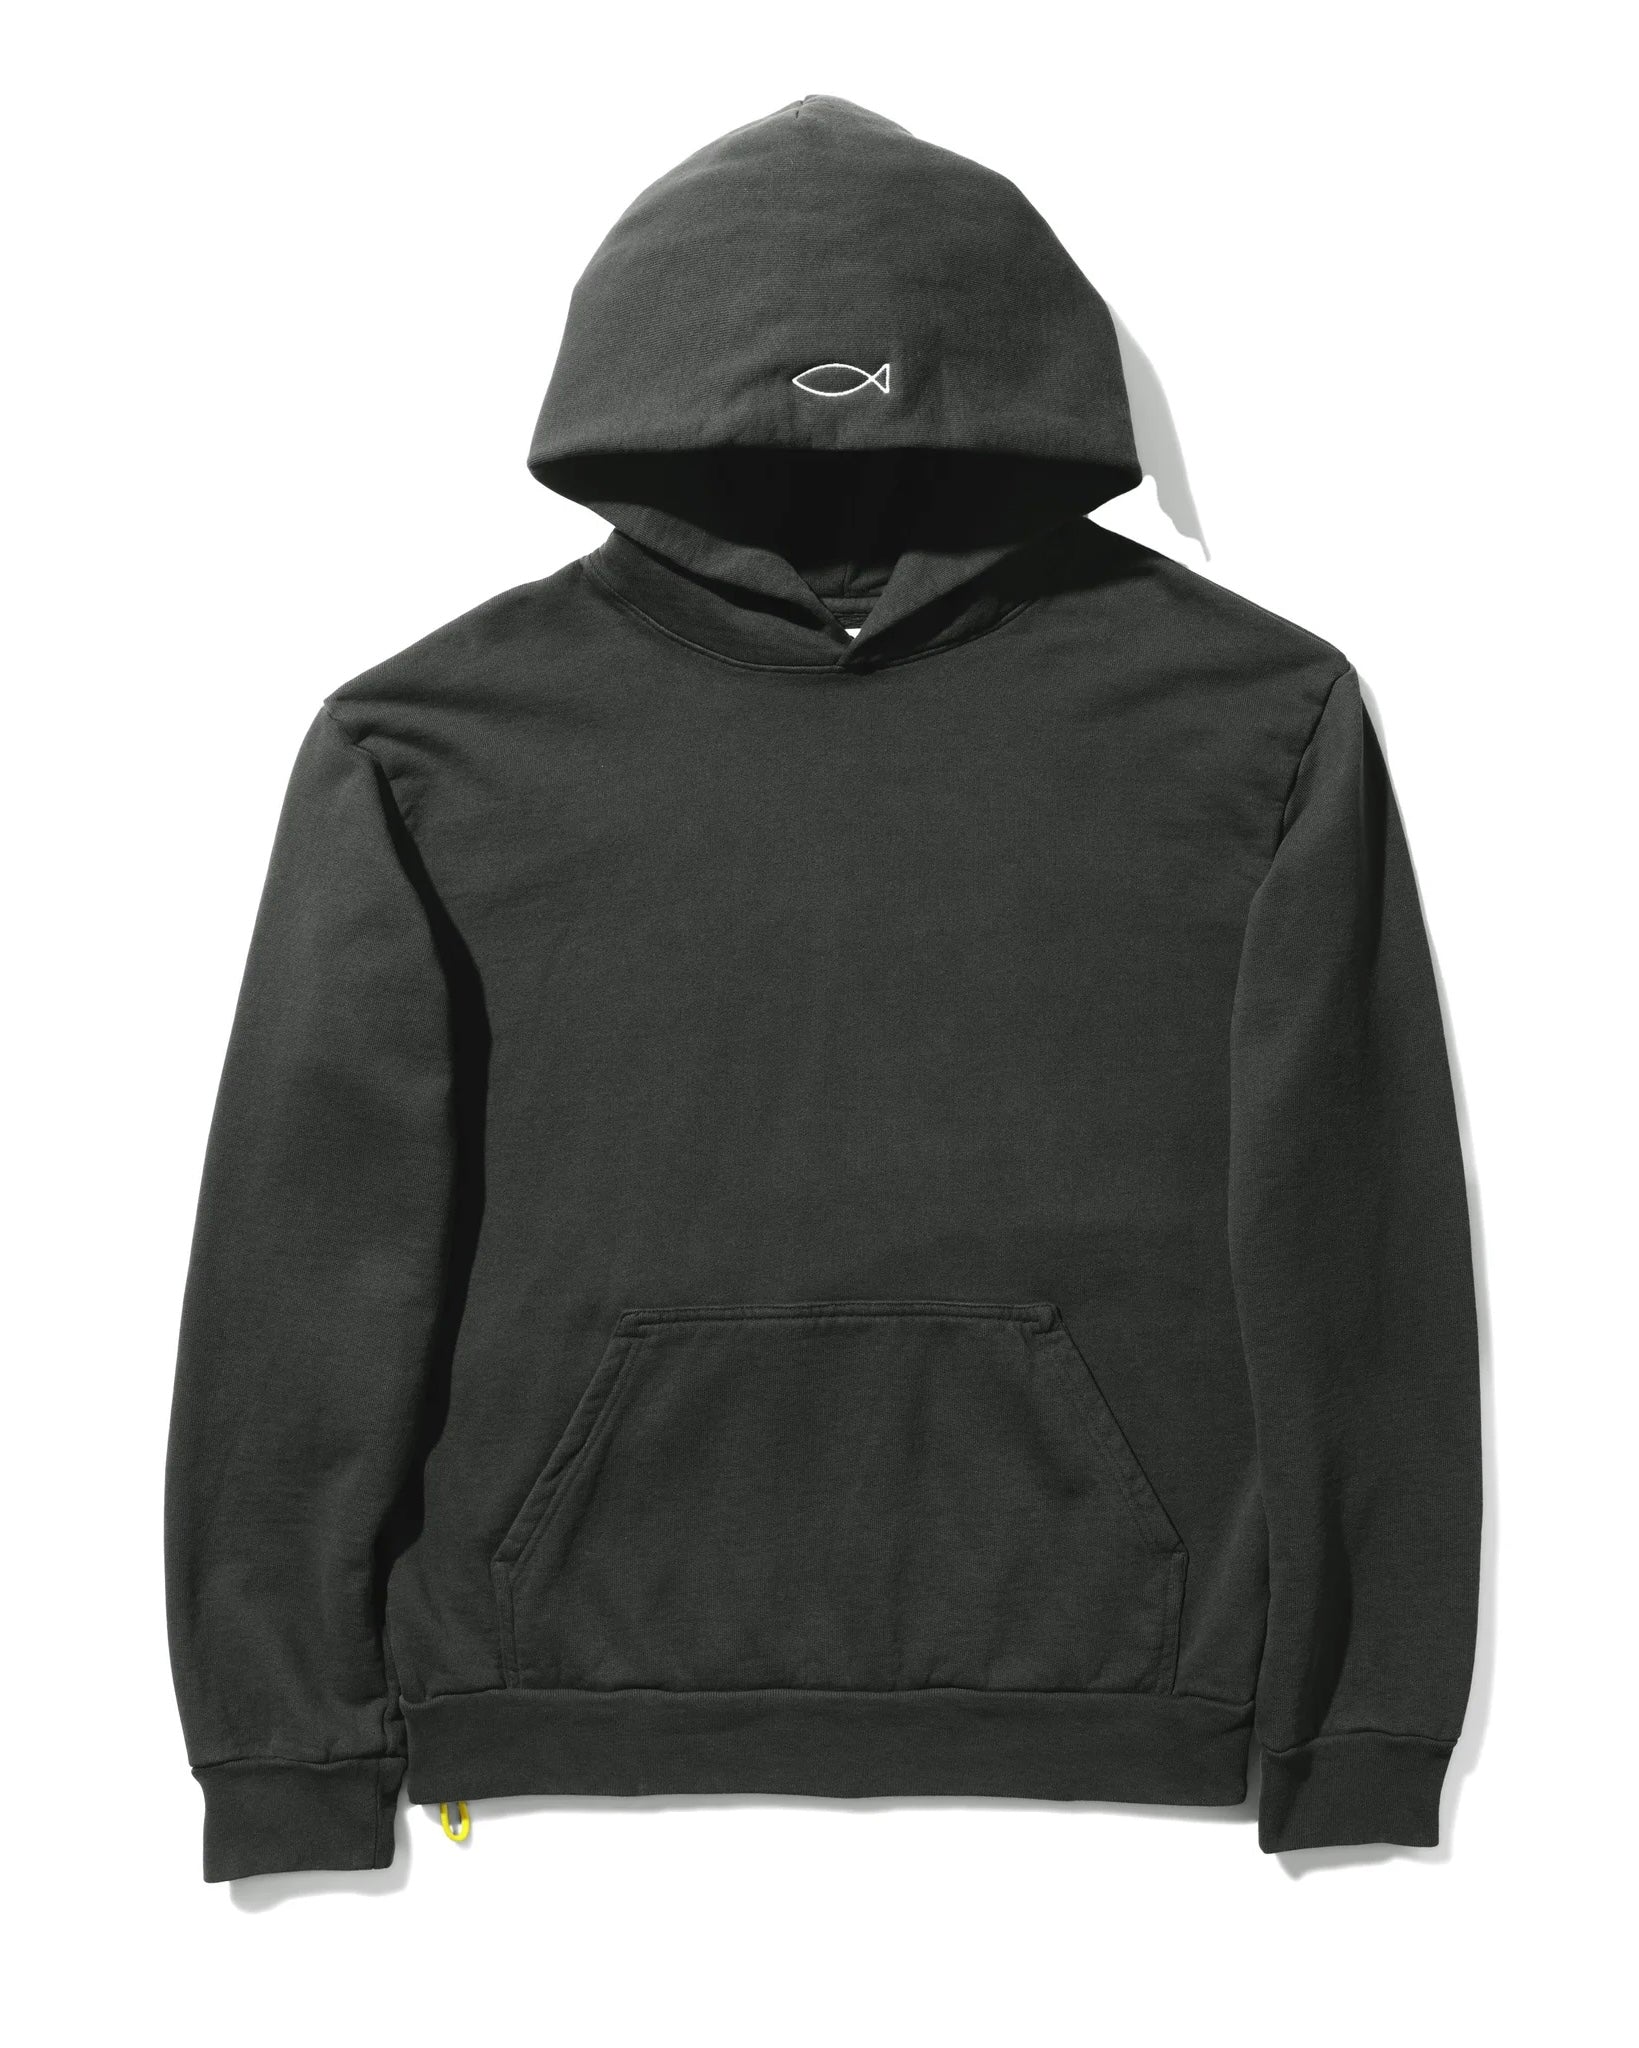 【WESTERN HYDRODYNAMIC RESEARCH】CANNOT BE CAUGHT HOODIE - BLACK